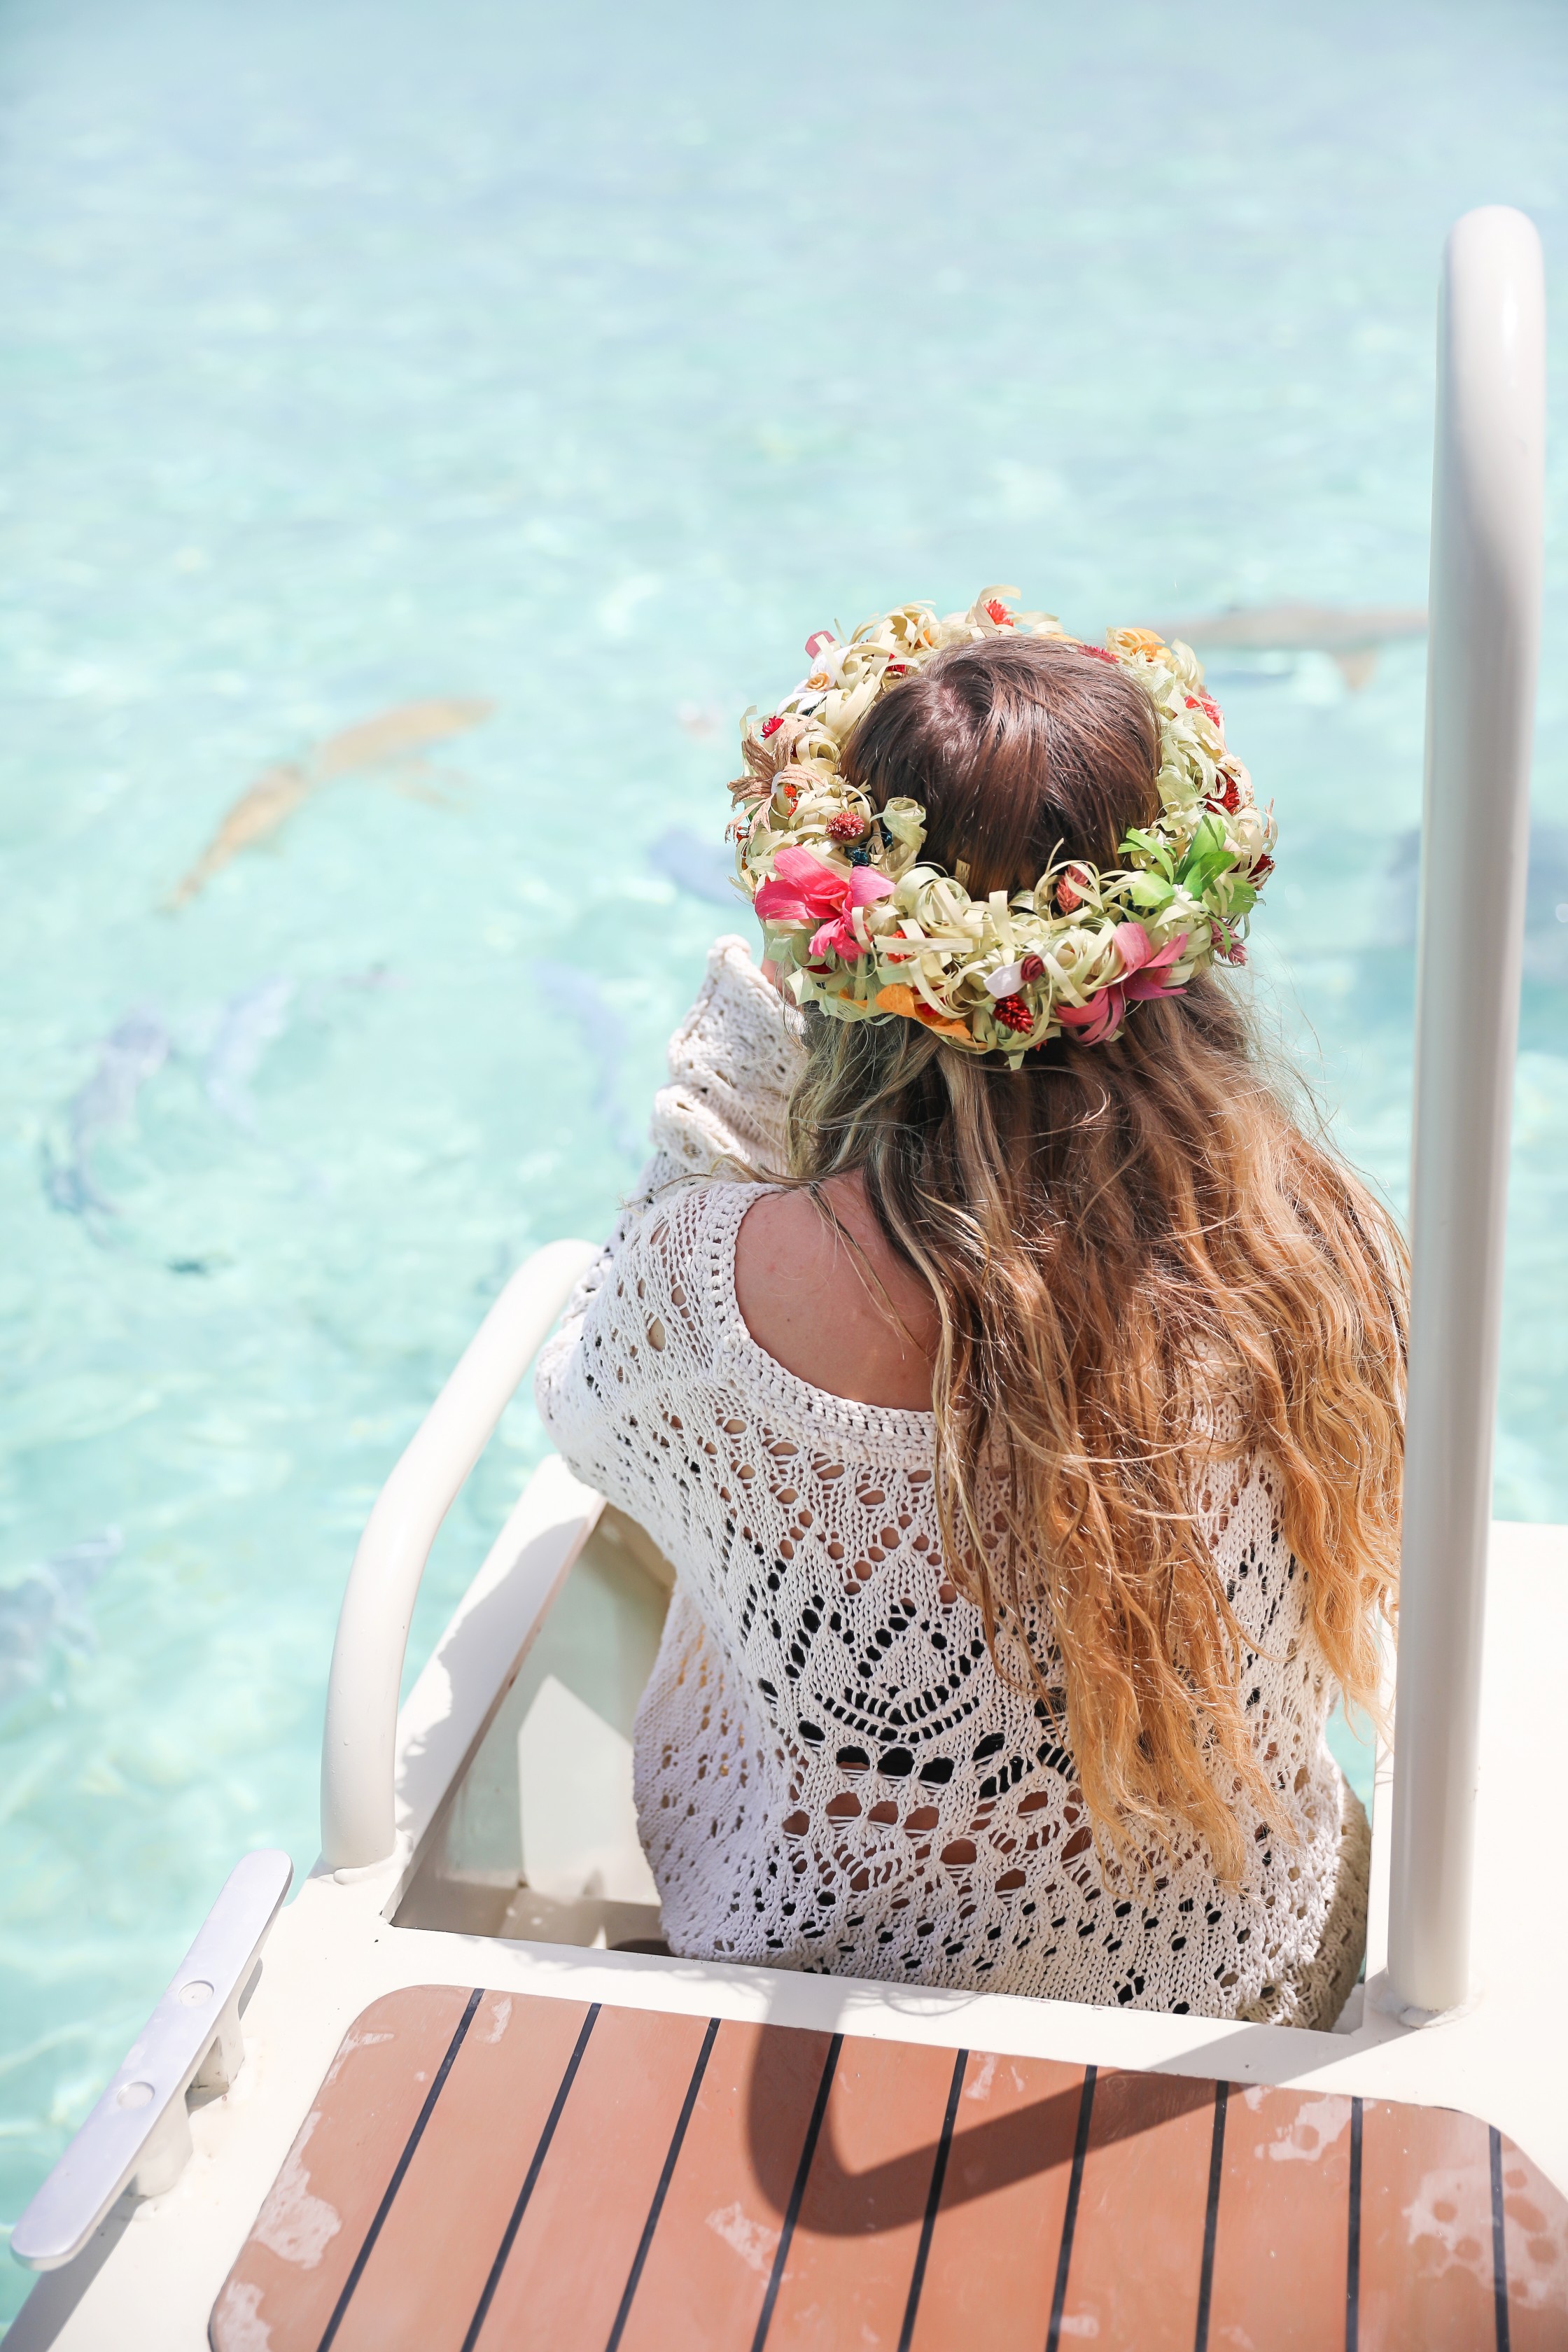 Swimming with sharks in Bora Bora, French Polynesia! I wore the prettiest Bora Bora flower crown by the ocean! The water was so clear and blue! Details on travel blog daily dose of charm by travel blogger and fashion blogger lauren lindmark